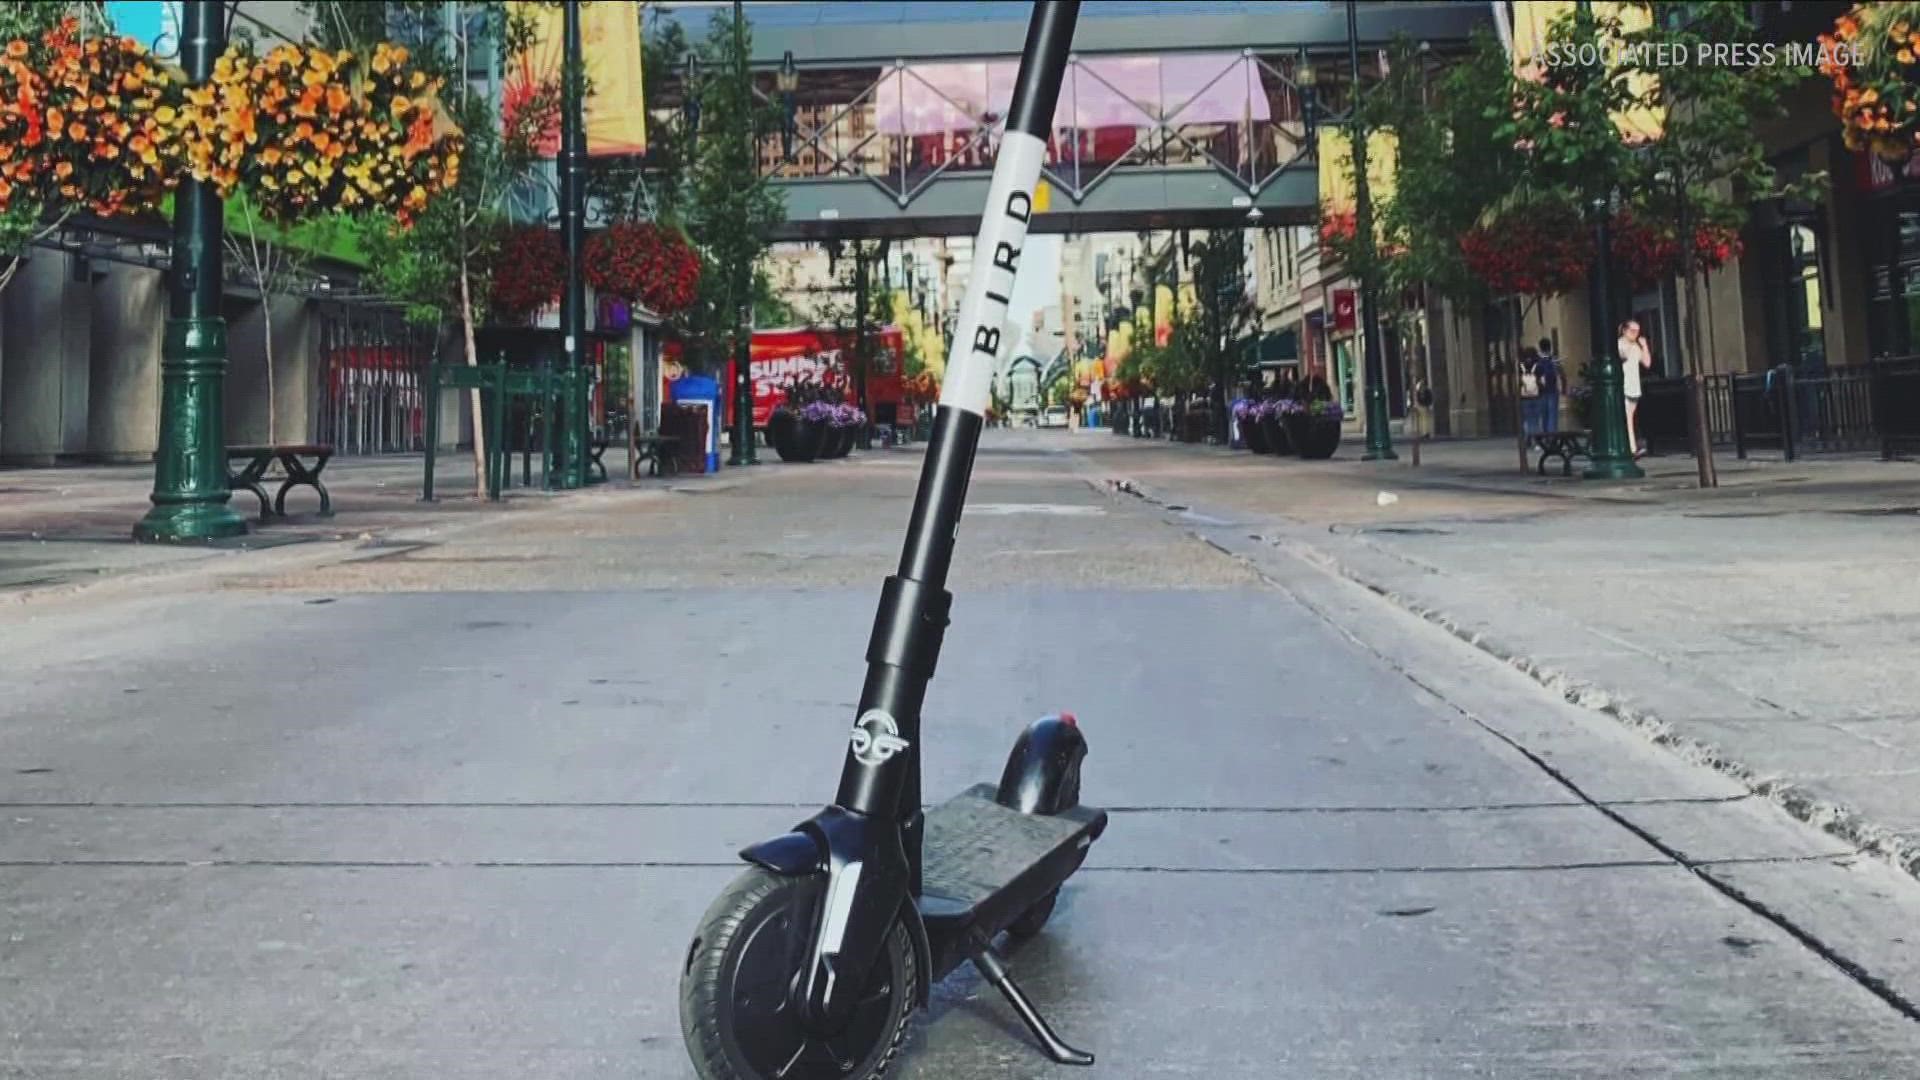 Tylec says he thought it was interesting.. and could be a cheap, environmentally-friendly way for people to get around town. The city isn't paying for these at all.